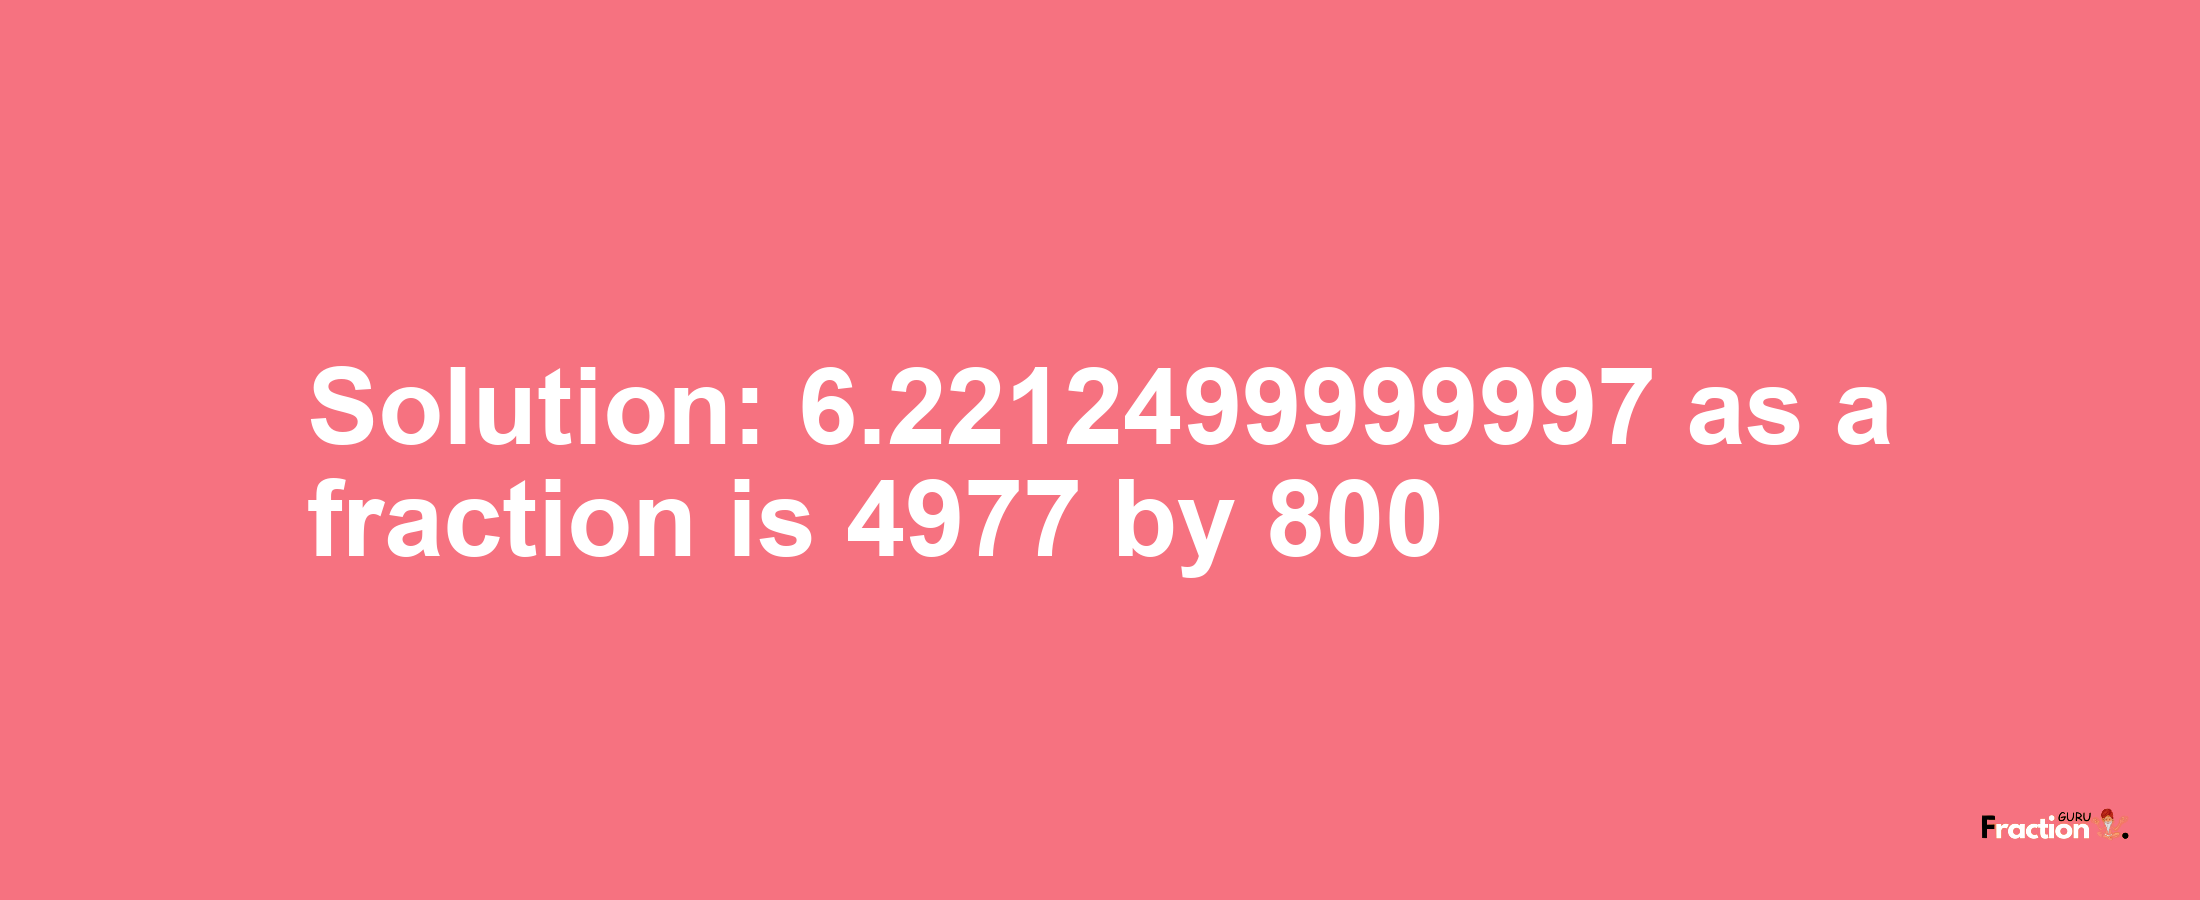 Solution:6.2212499999997 as a fraction is 4977/800